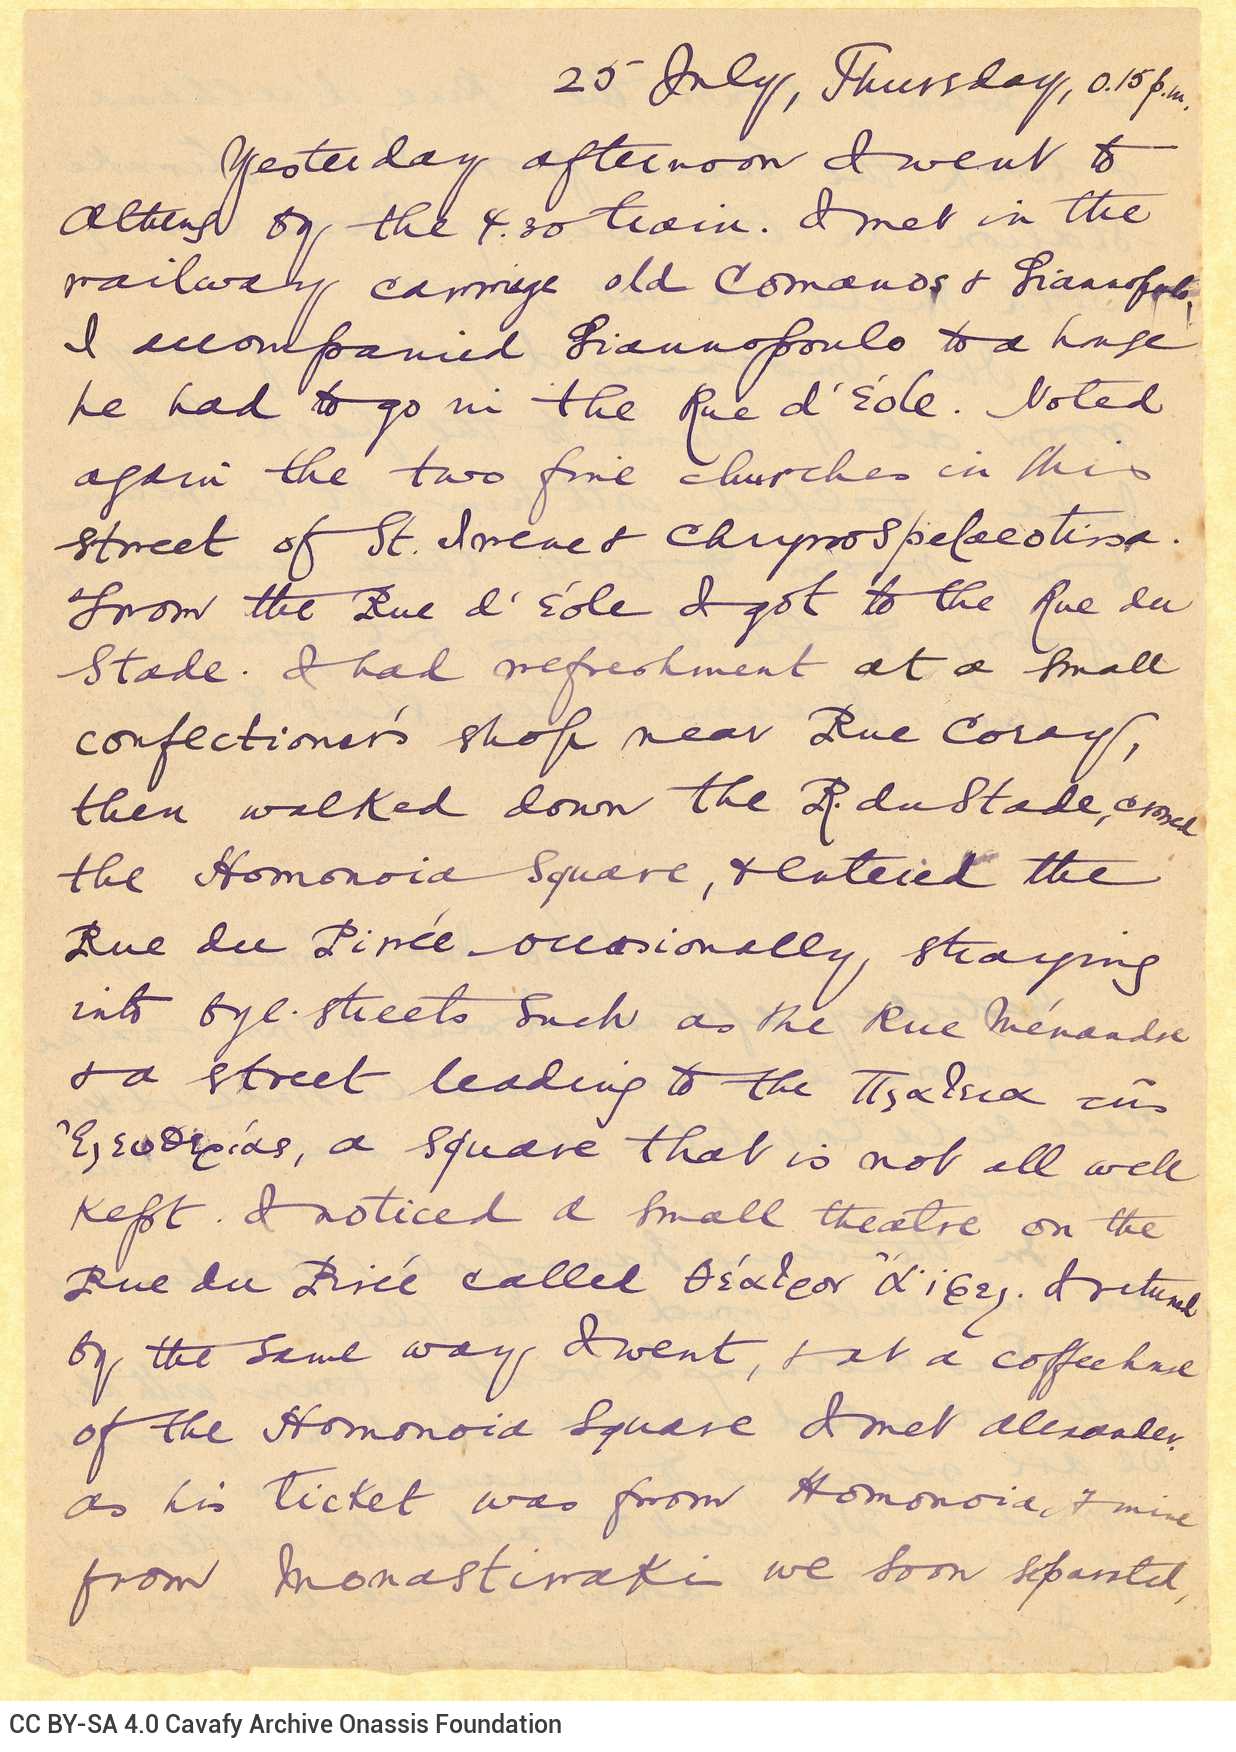 Handwritten diary from Cavafy's trip to Greece during the period 13 June-5 August 1901. It is written in English, on 31 sh